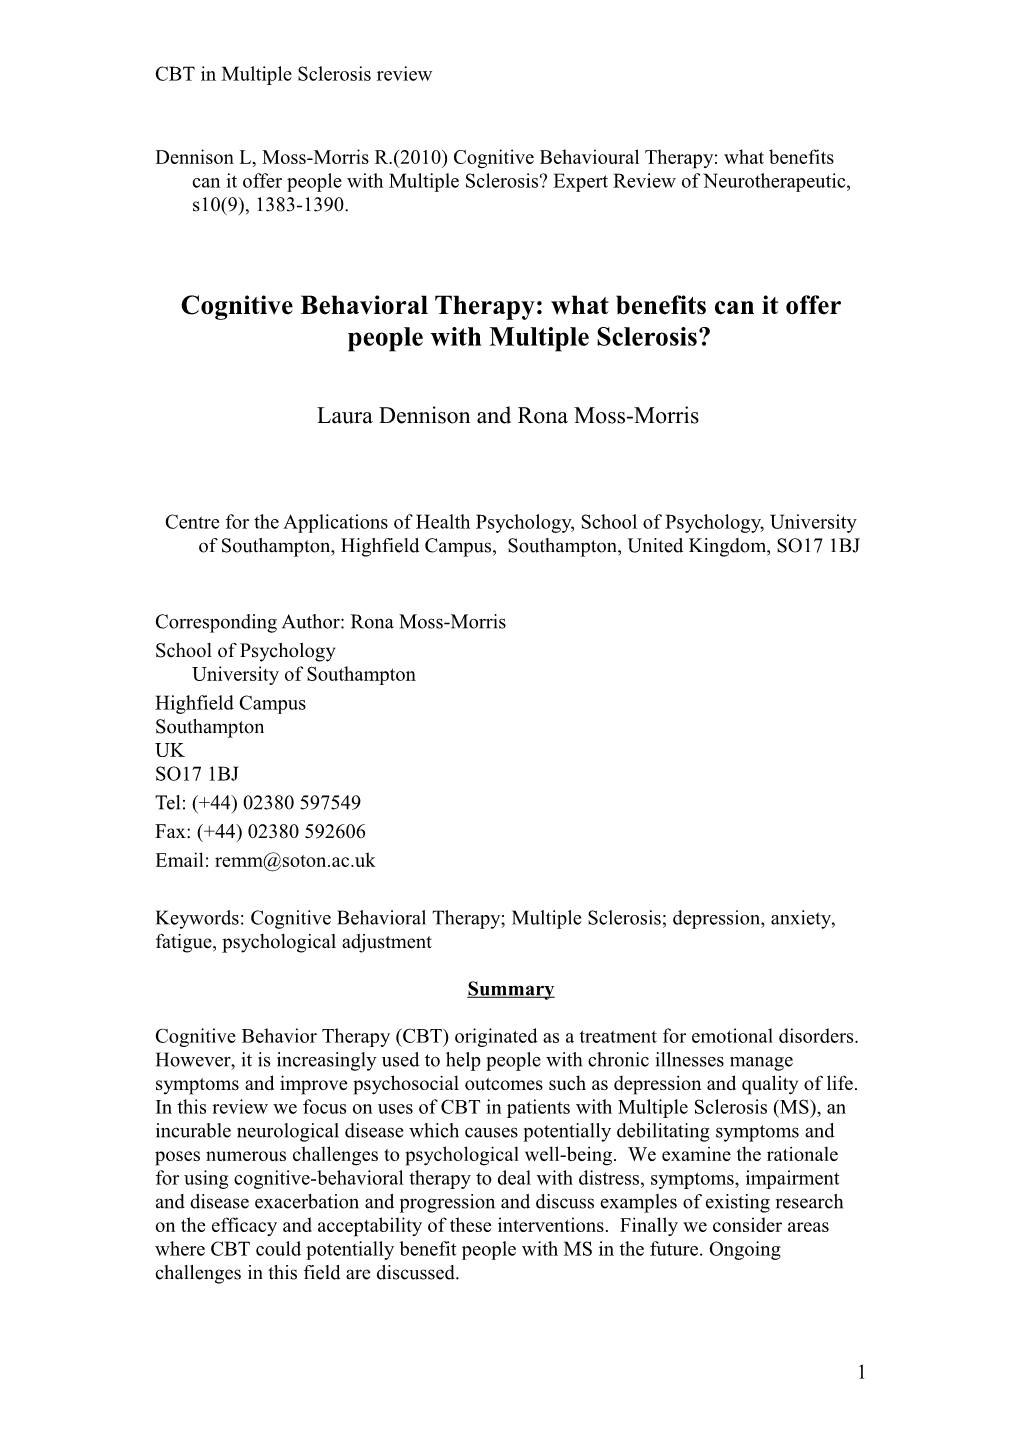 Cognitive Behavioral Therapy: What Benefits Can It Offer People with Multiple Sclerosis